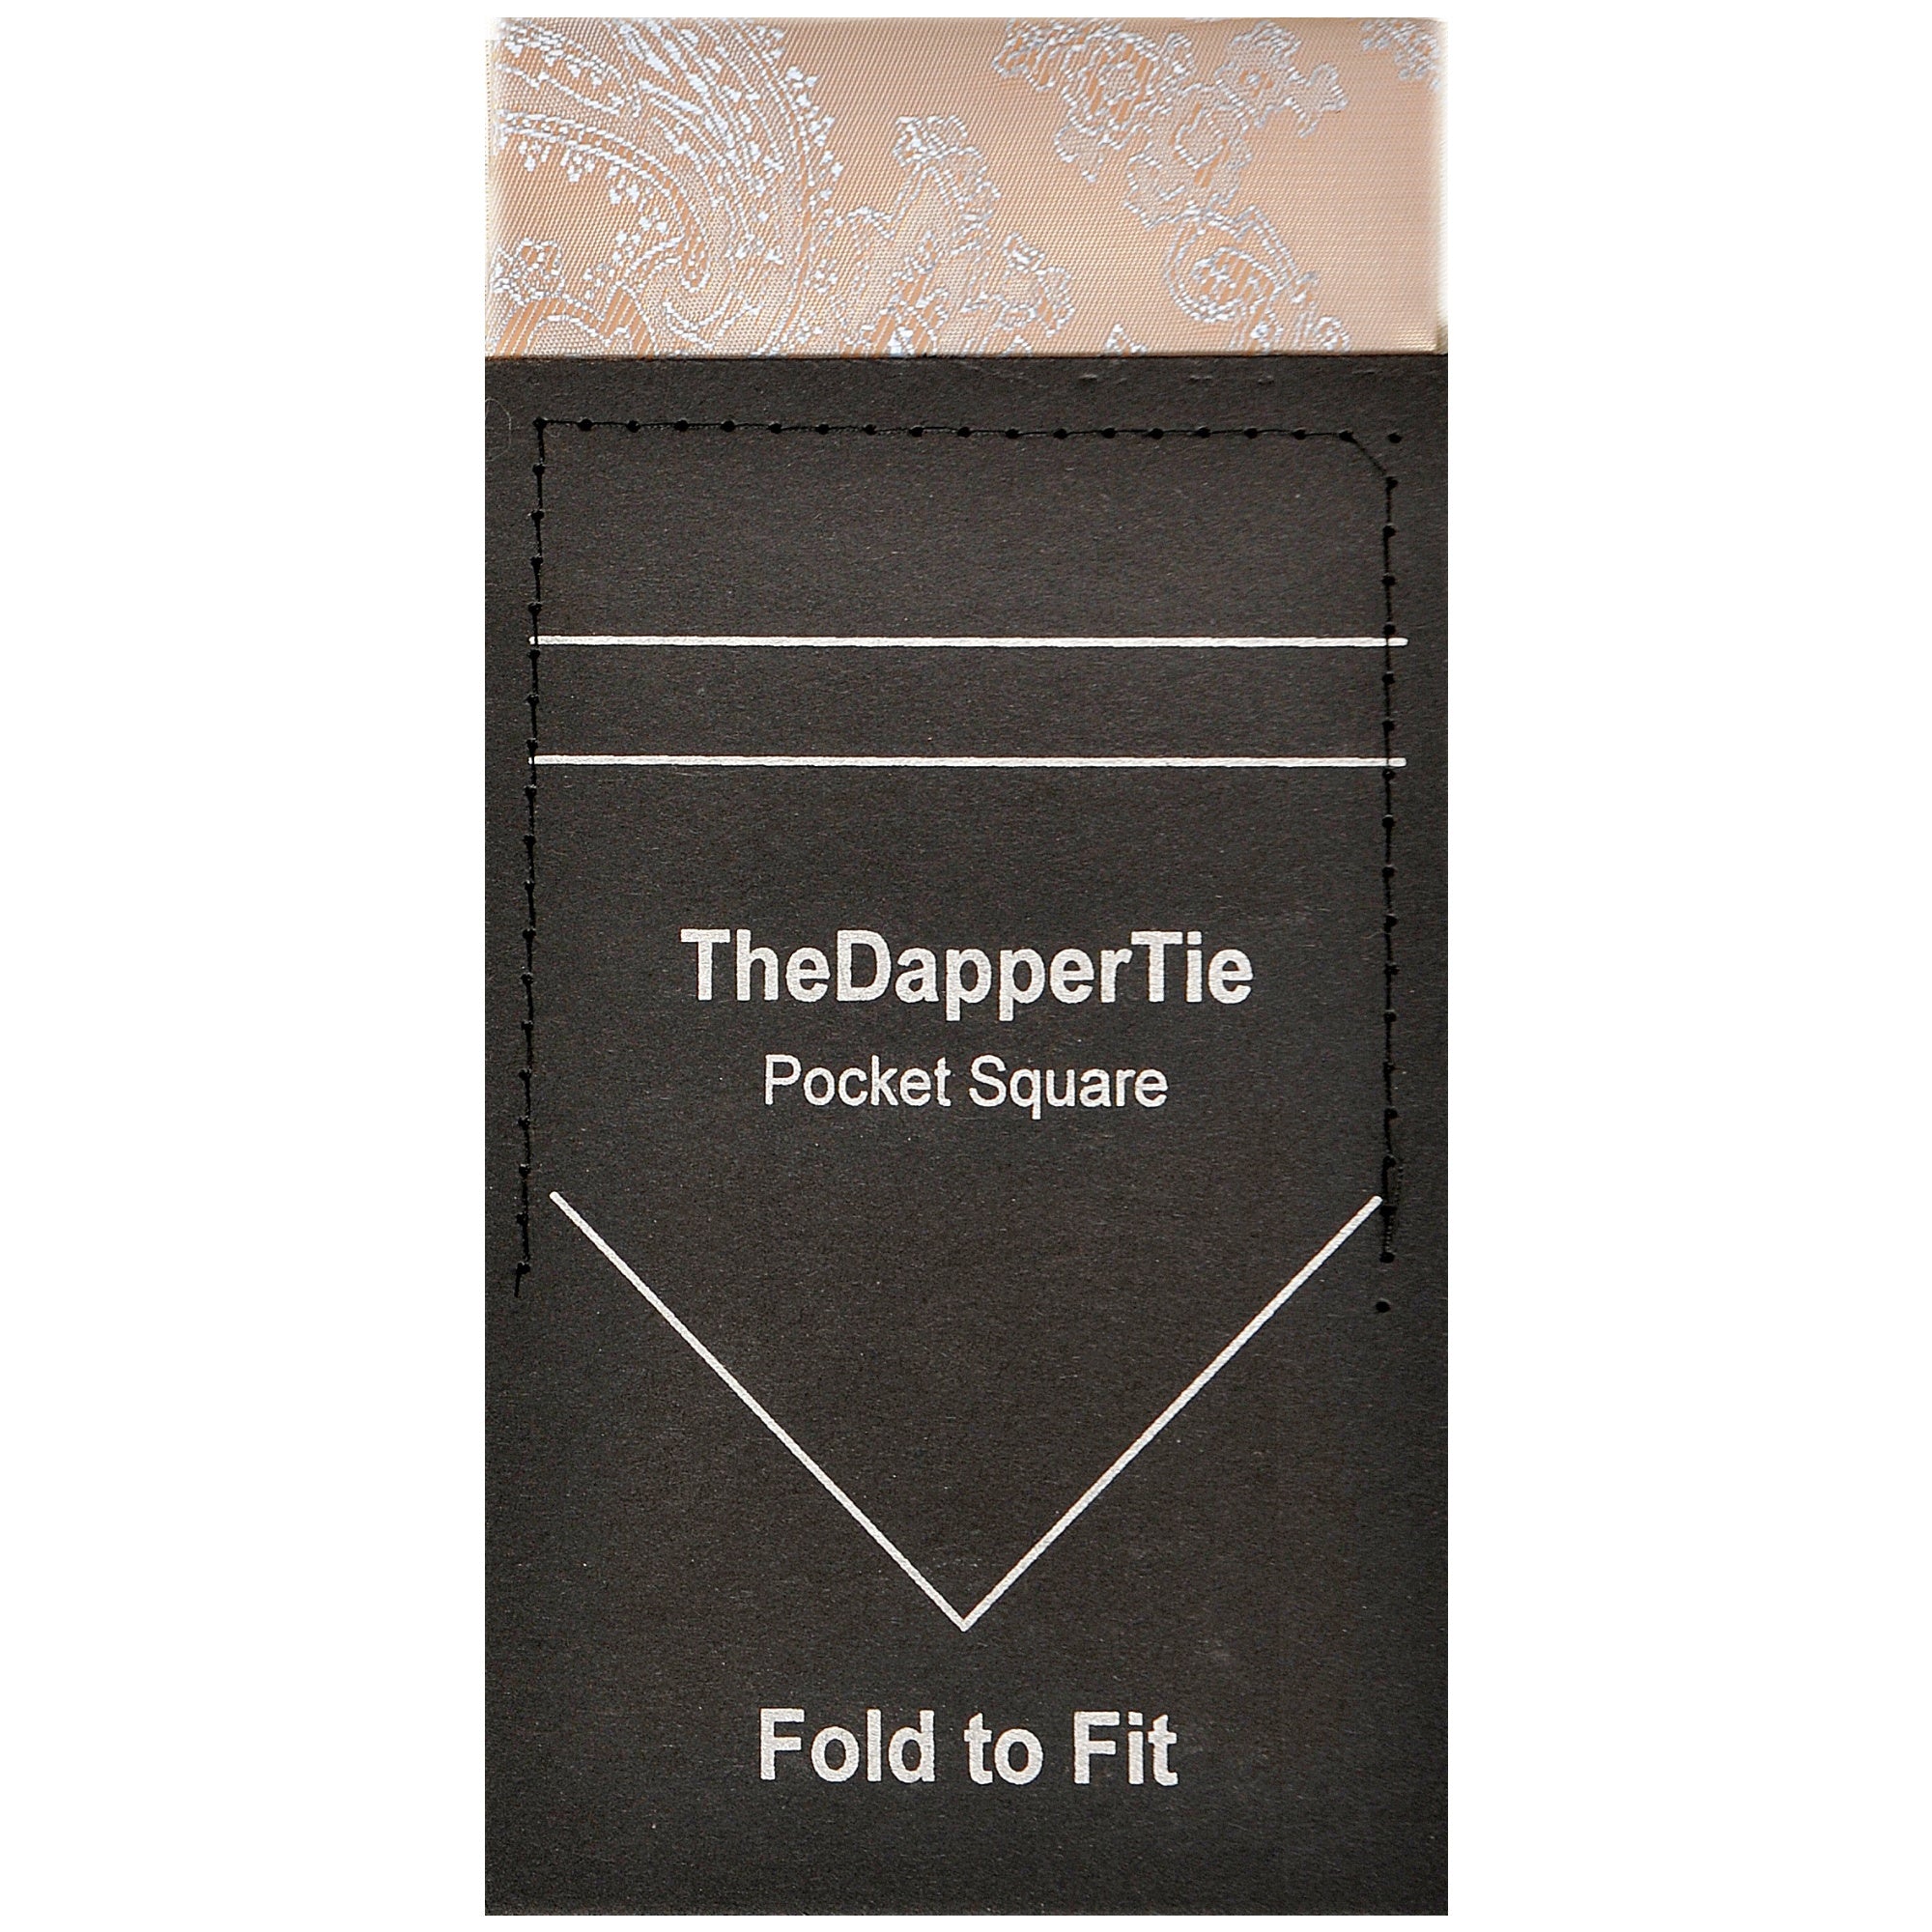 TheDapperTie - New Men's Paisley Flat Pre Folded Pocket Square on Card Prefolded Pocket Squares TheDapperTie Tan & Silver Grey Regular 